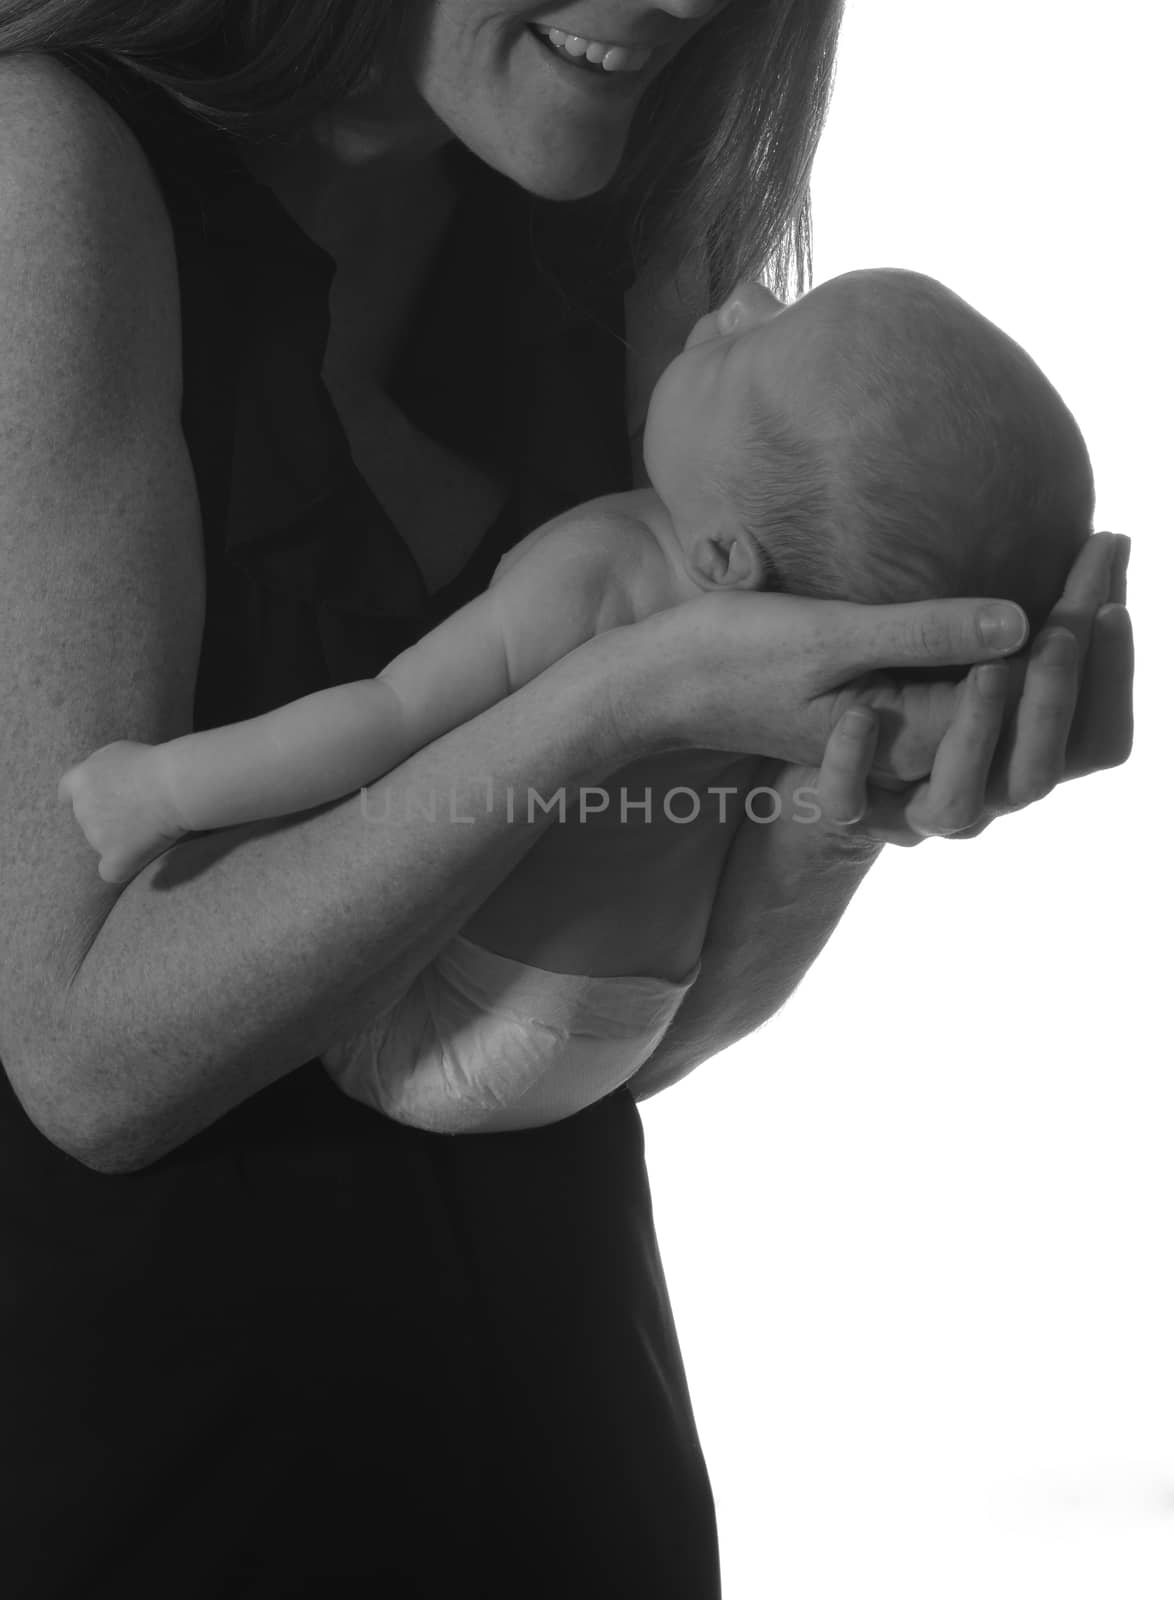 mom smiling at newborn infant and cradling baby in her arms